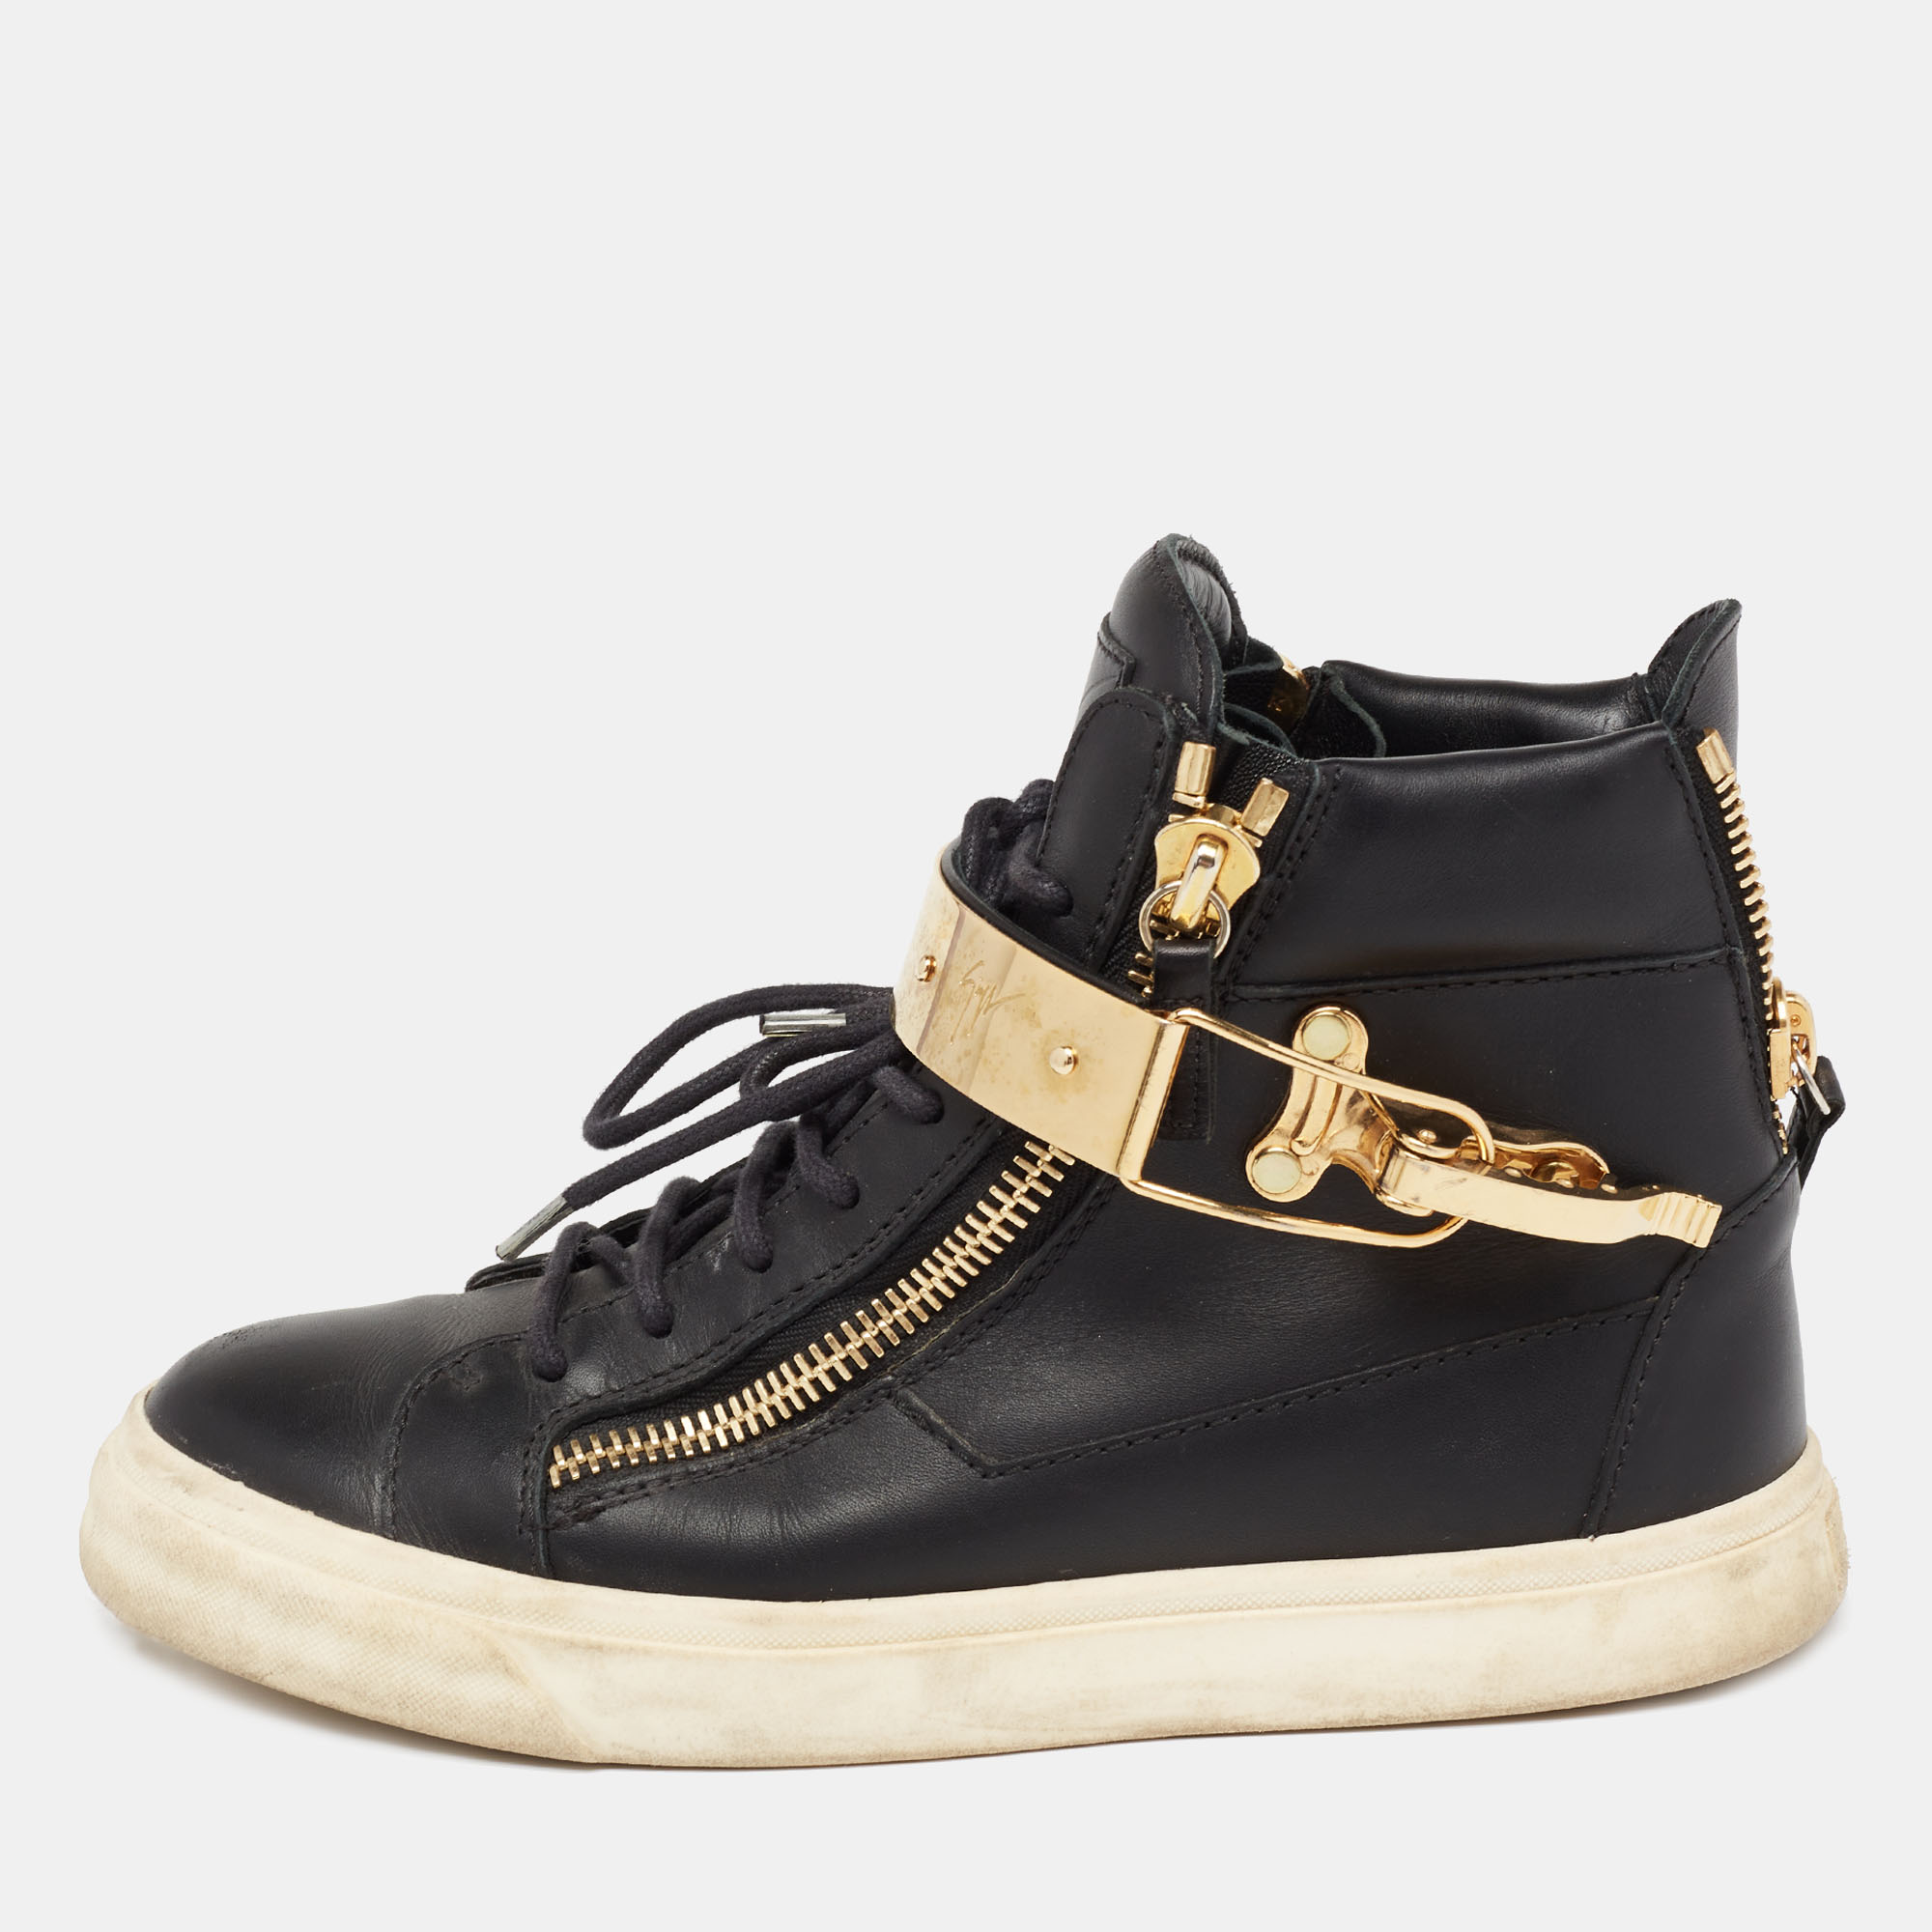 Giuseppe zanotti black/gold  leather coby high top sneakers size 37